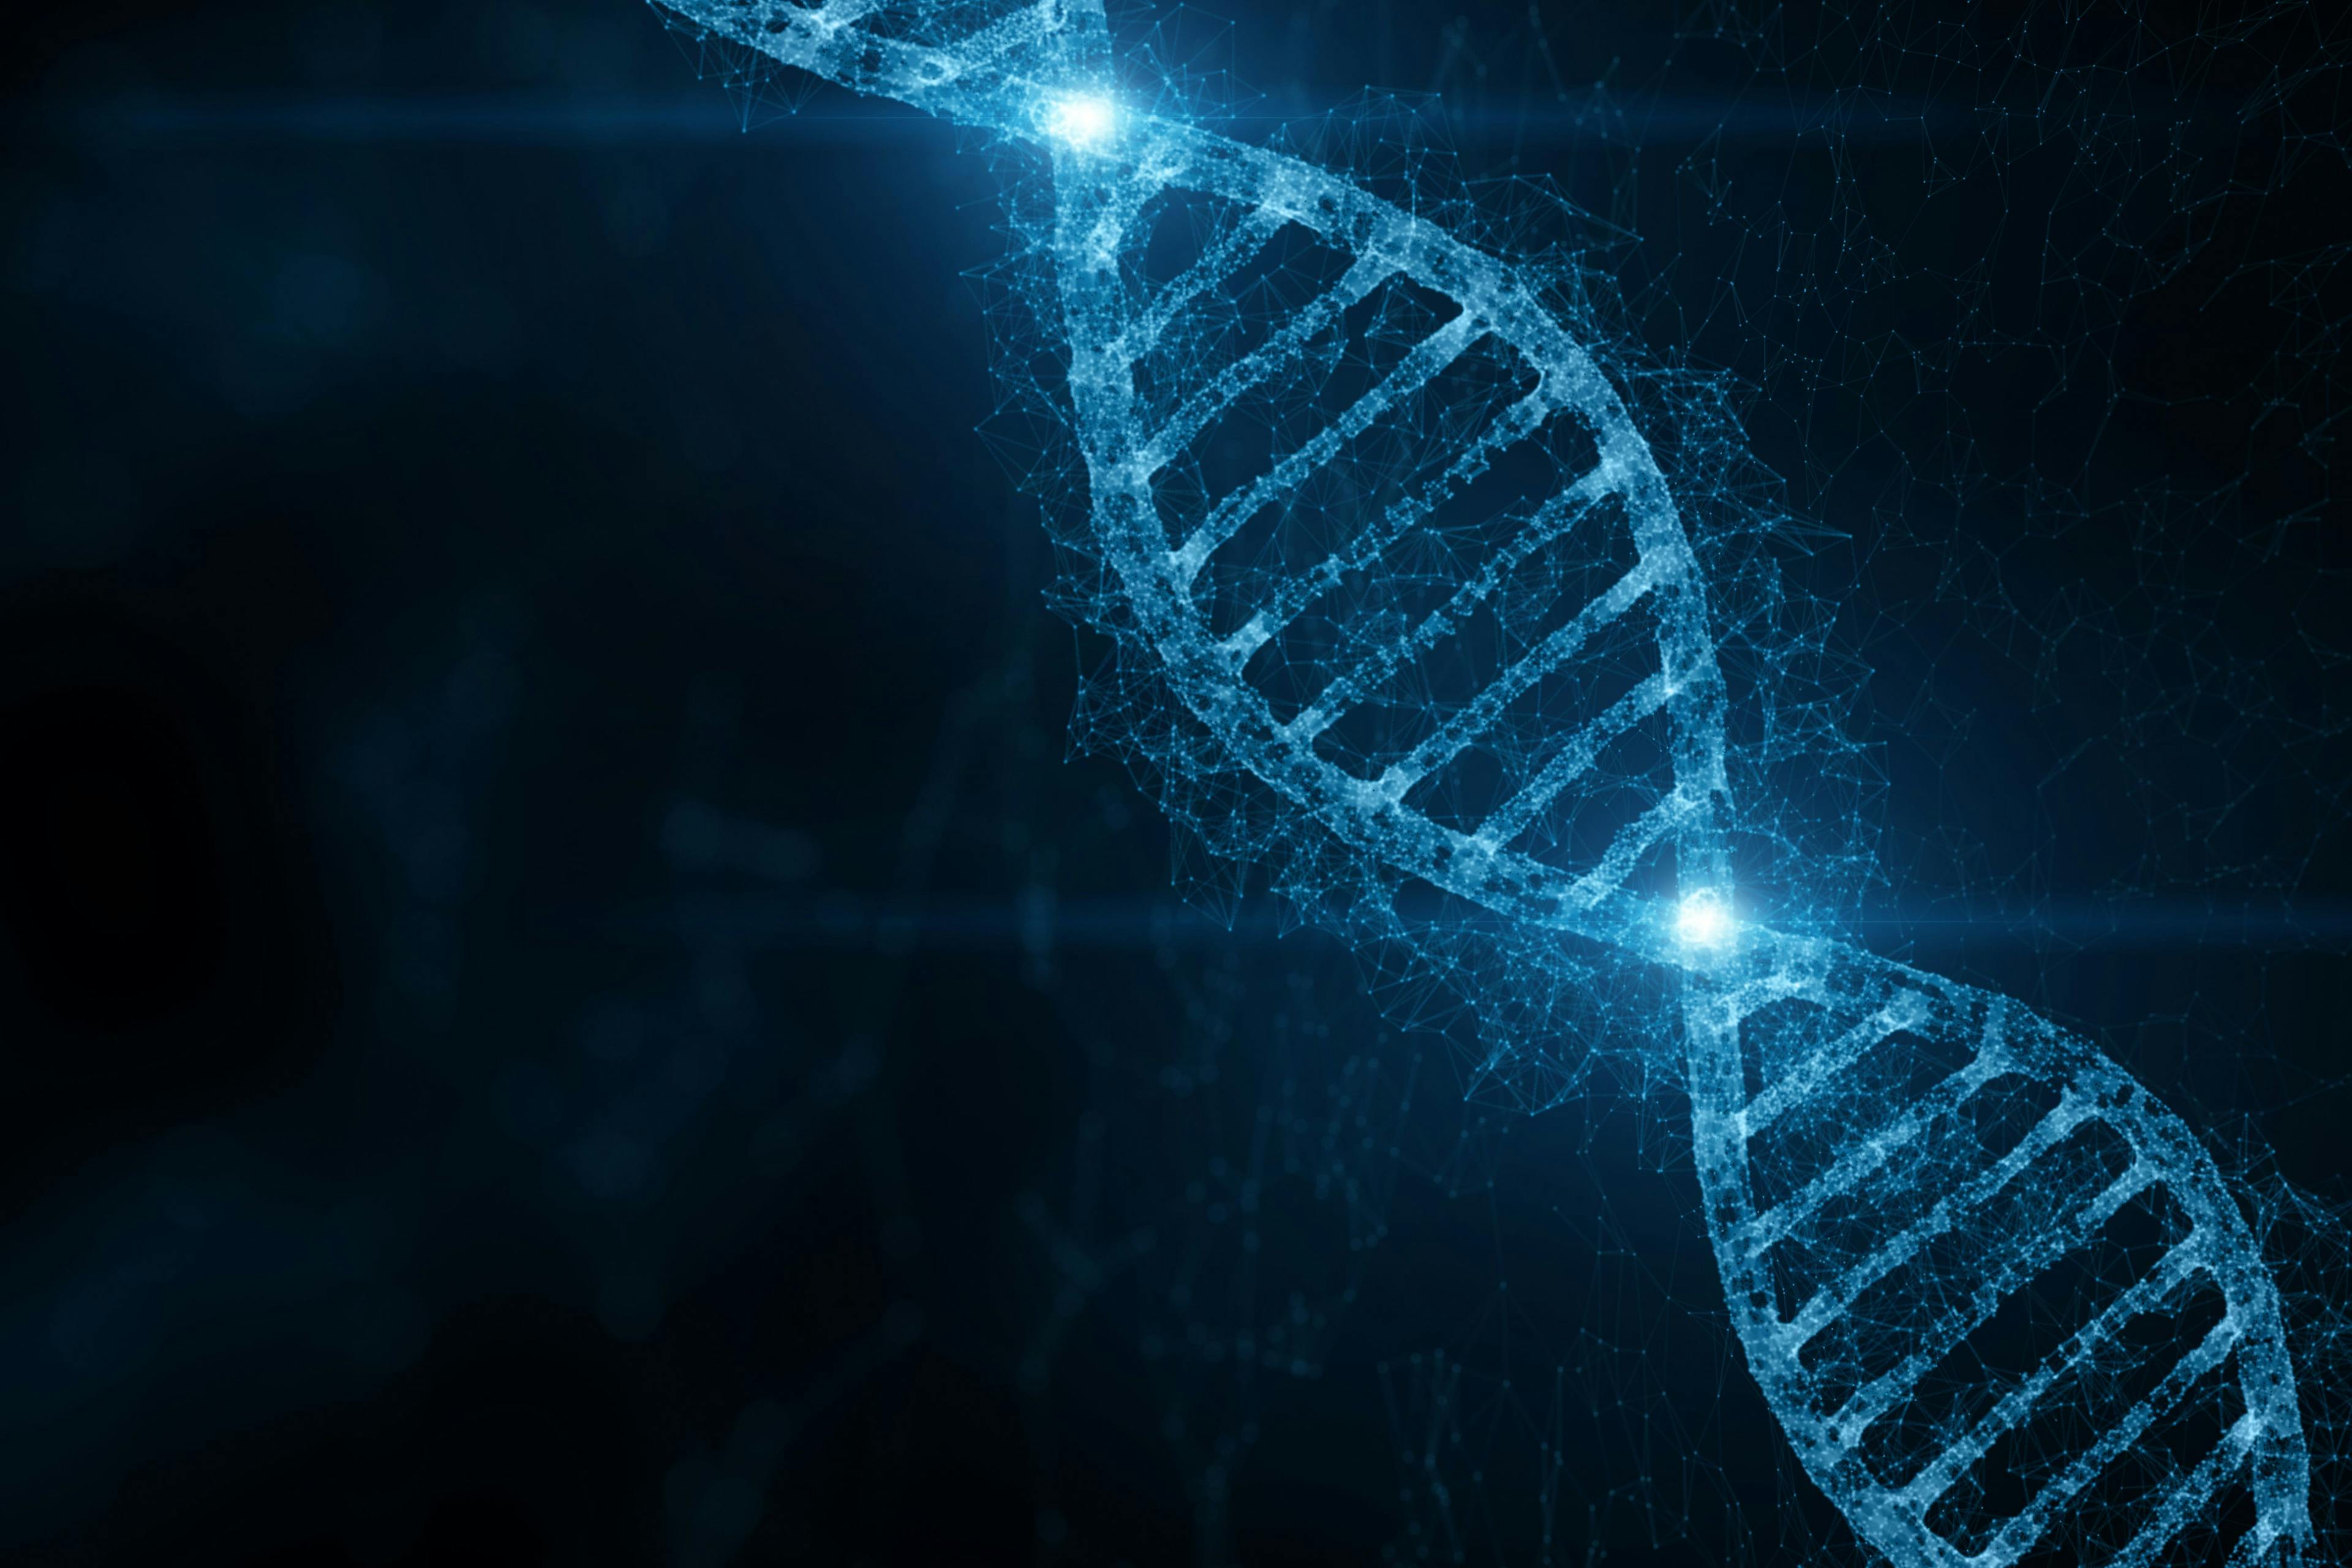 Abstract blue colored shiny dna molecule on futuristic digital illustration background. | Image Credit: © robsonphoto - stock.adobe.com. 